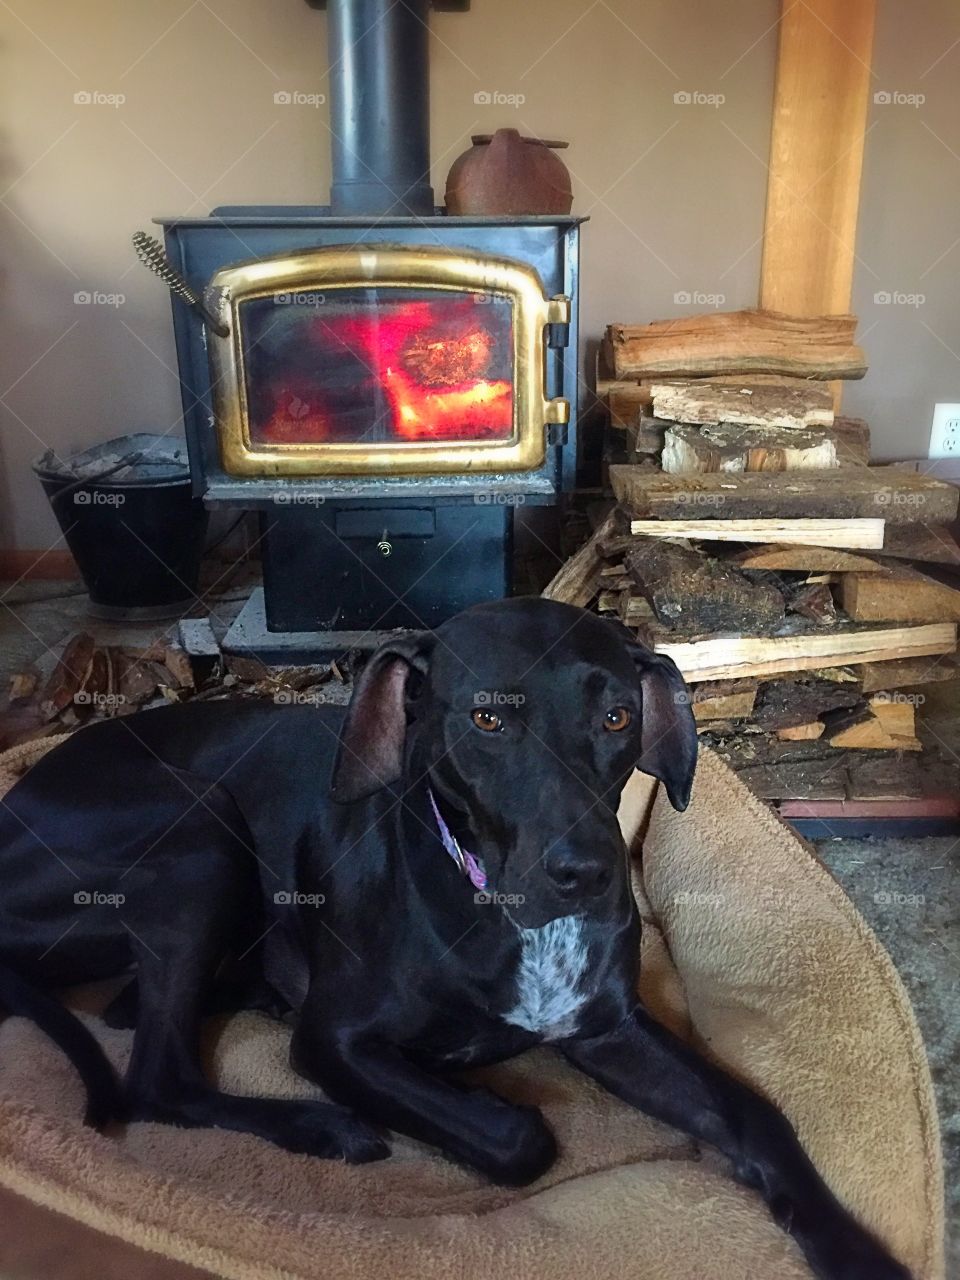 Her favorite spot in the world, sitting in front of the woodstove.